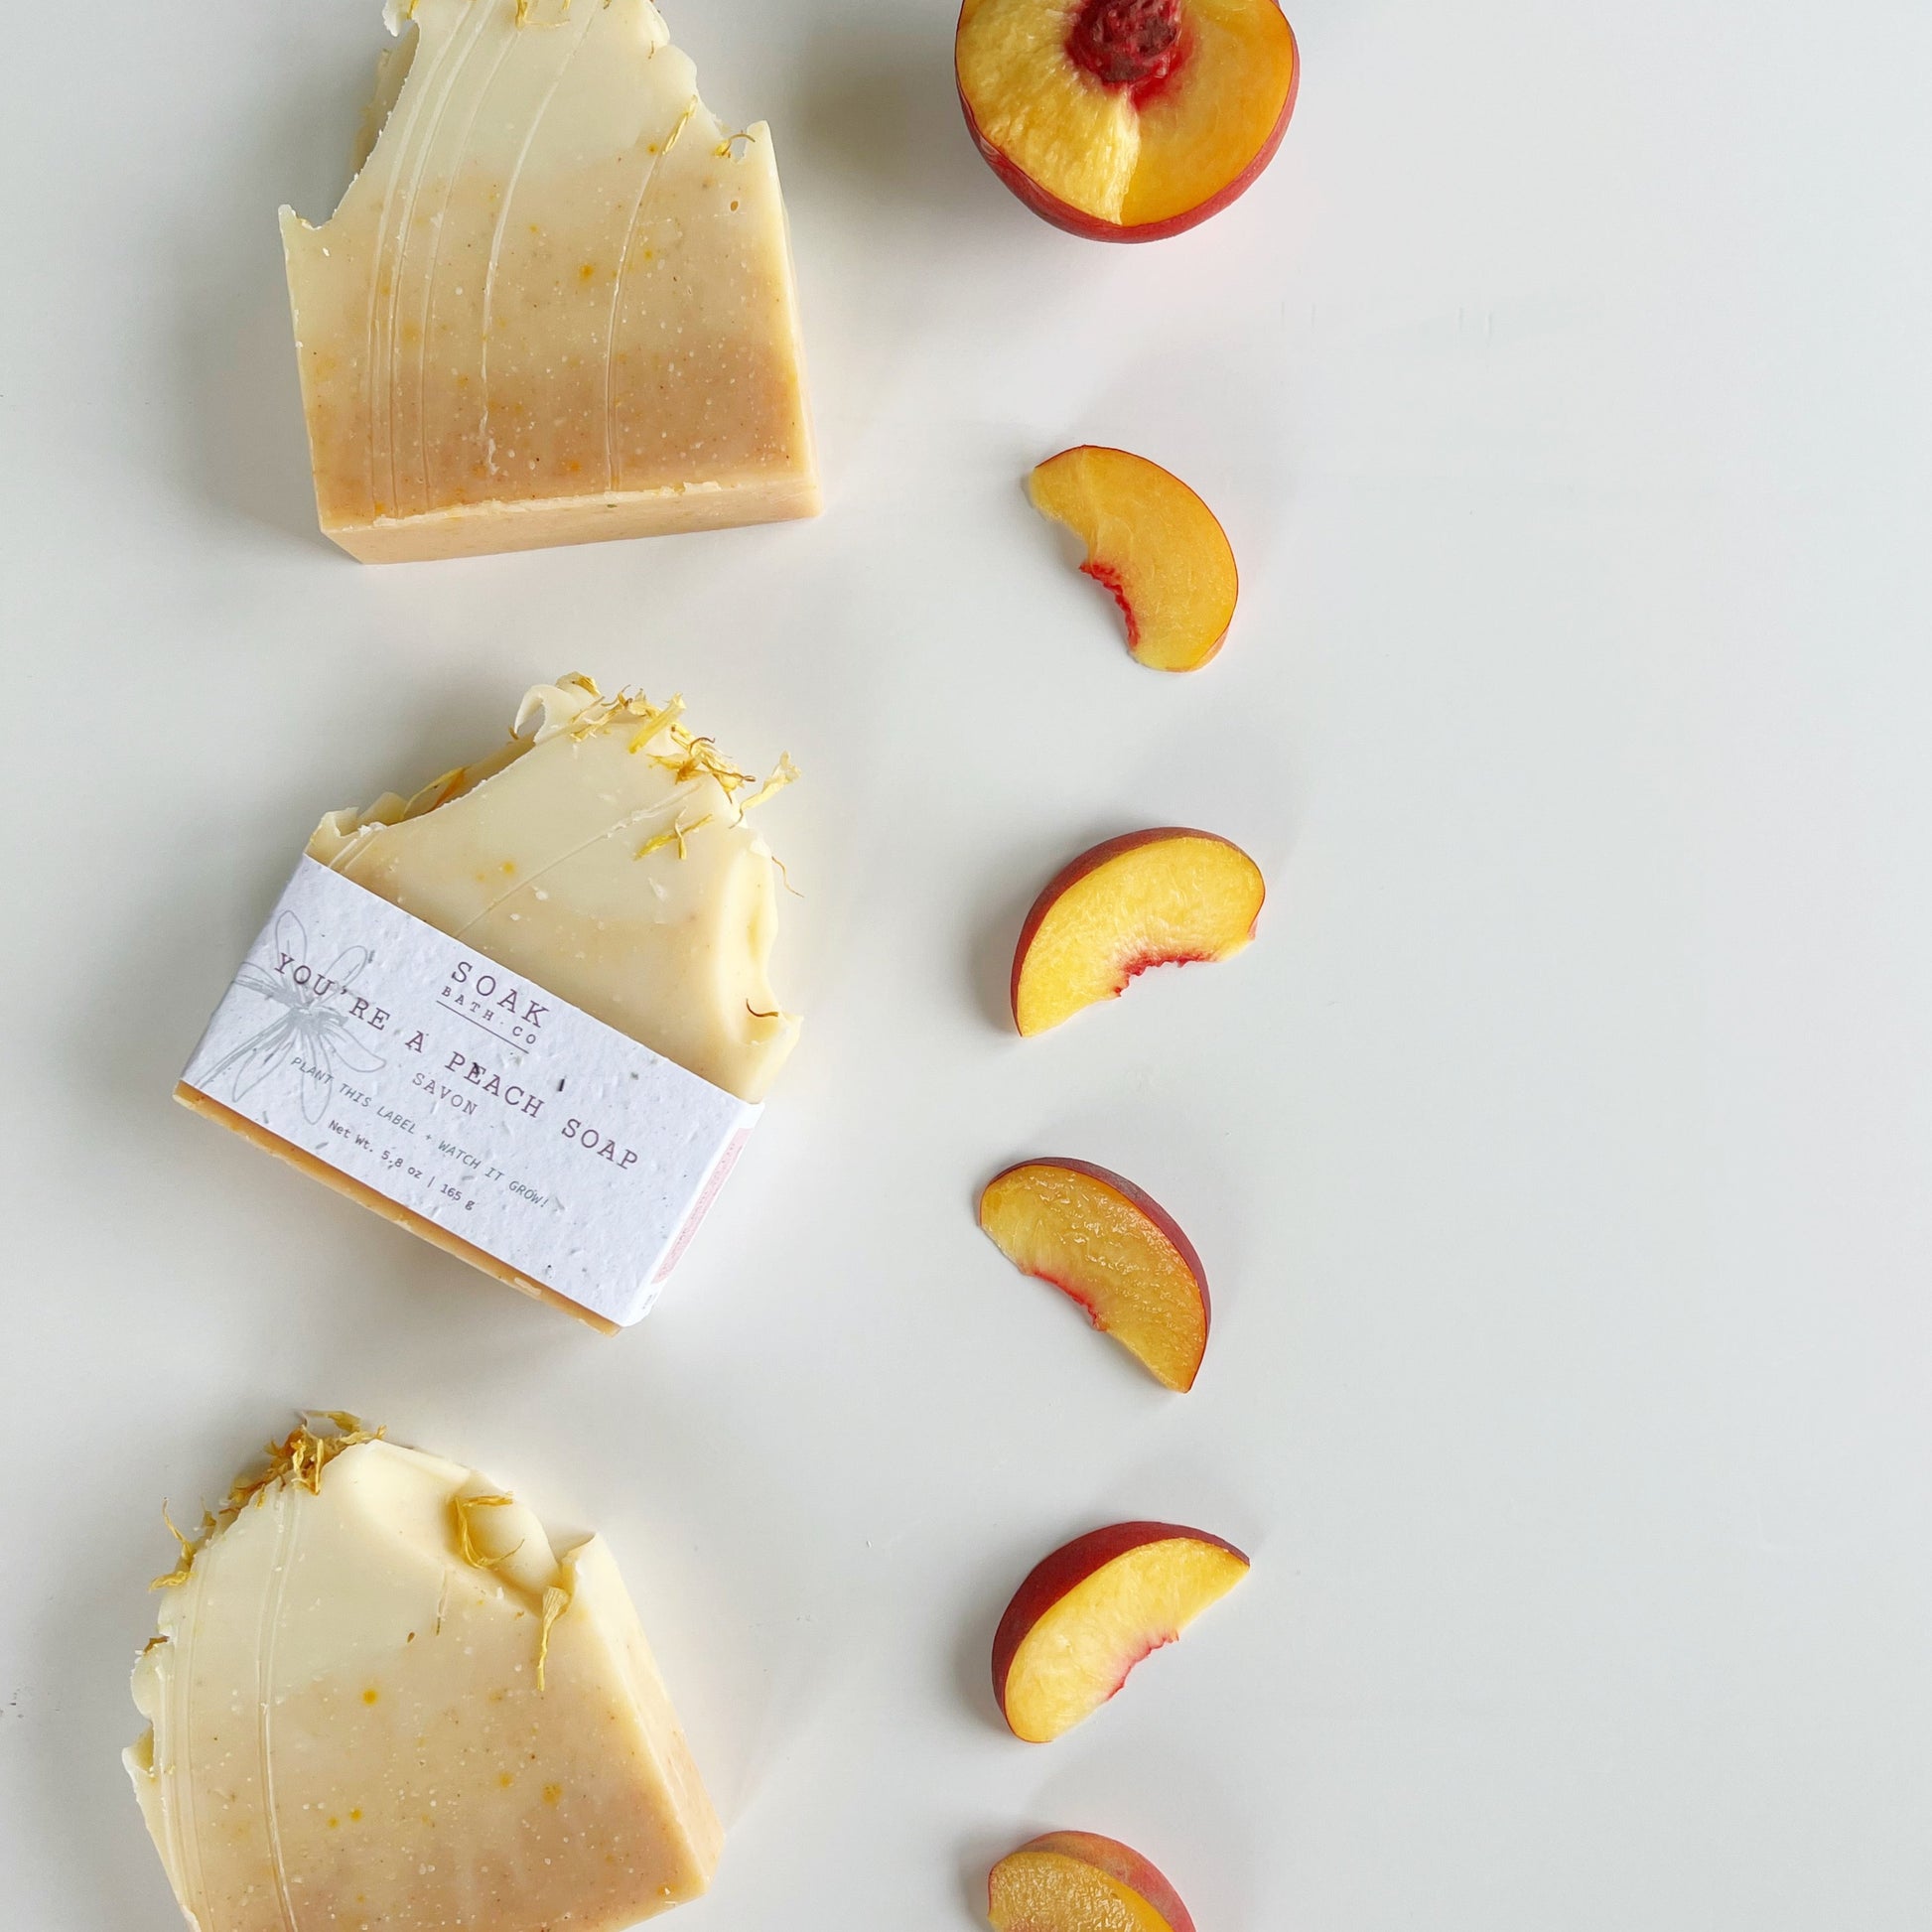 handmade soap bars scented with peach surrounded by peach slices